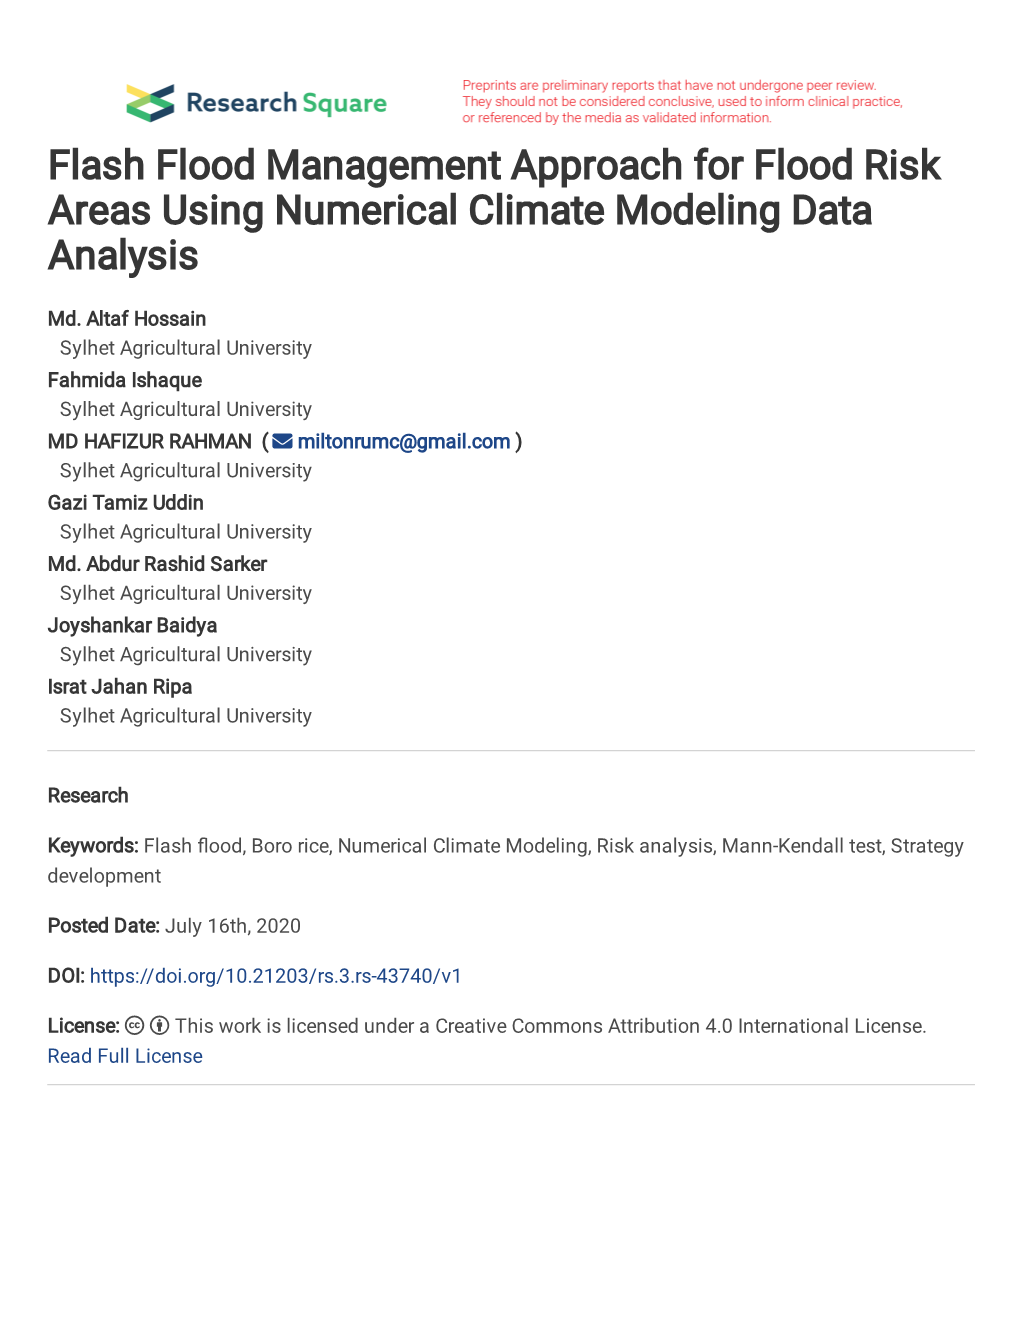 Flash Flood Management Approach for Flood Risk Areas Using Numerical Climate Modeling Data Analysis